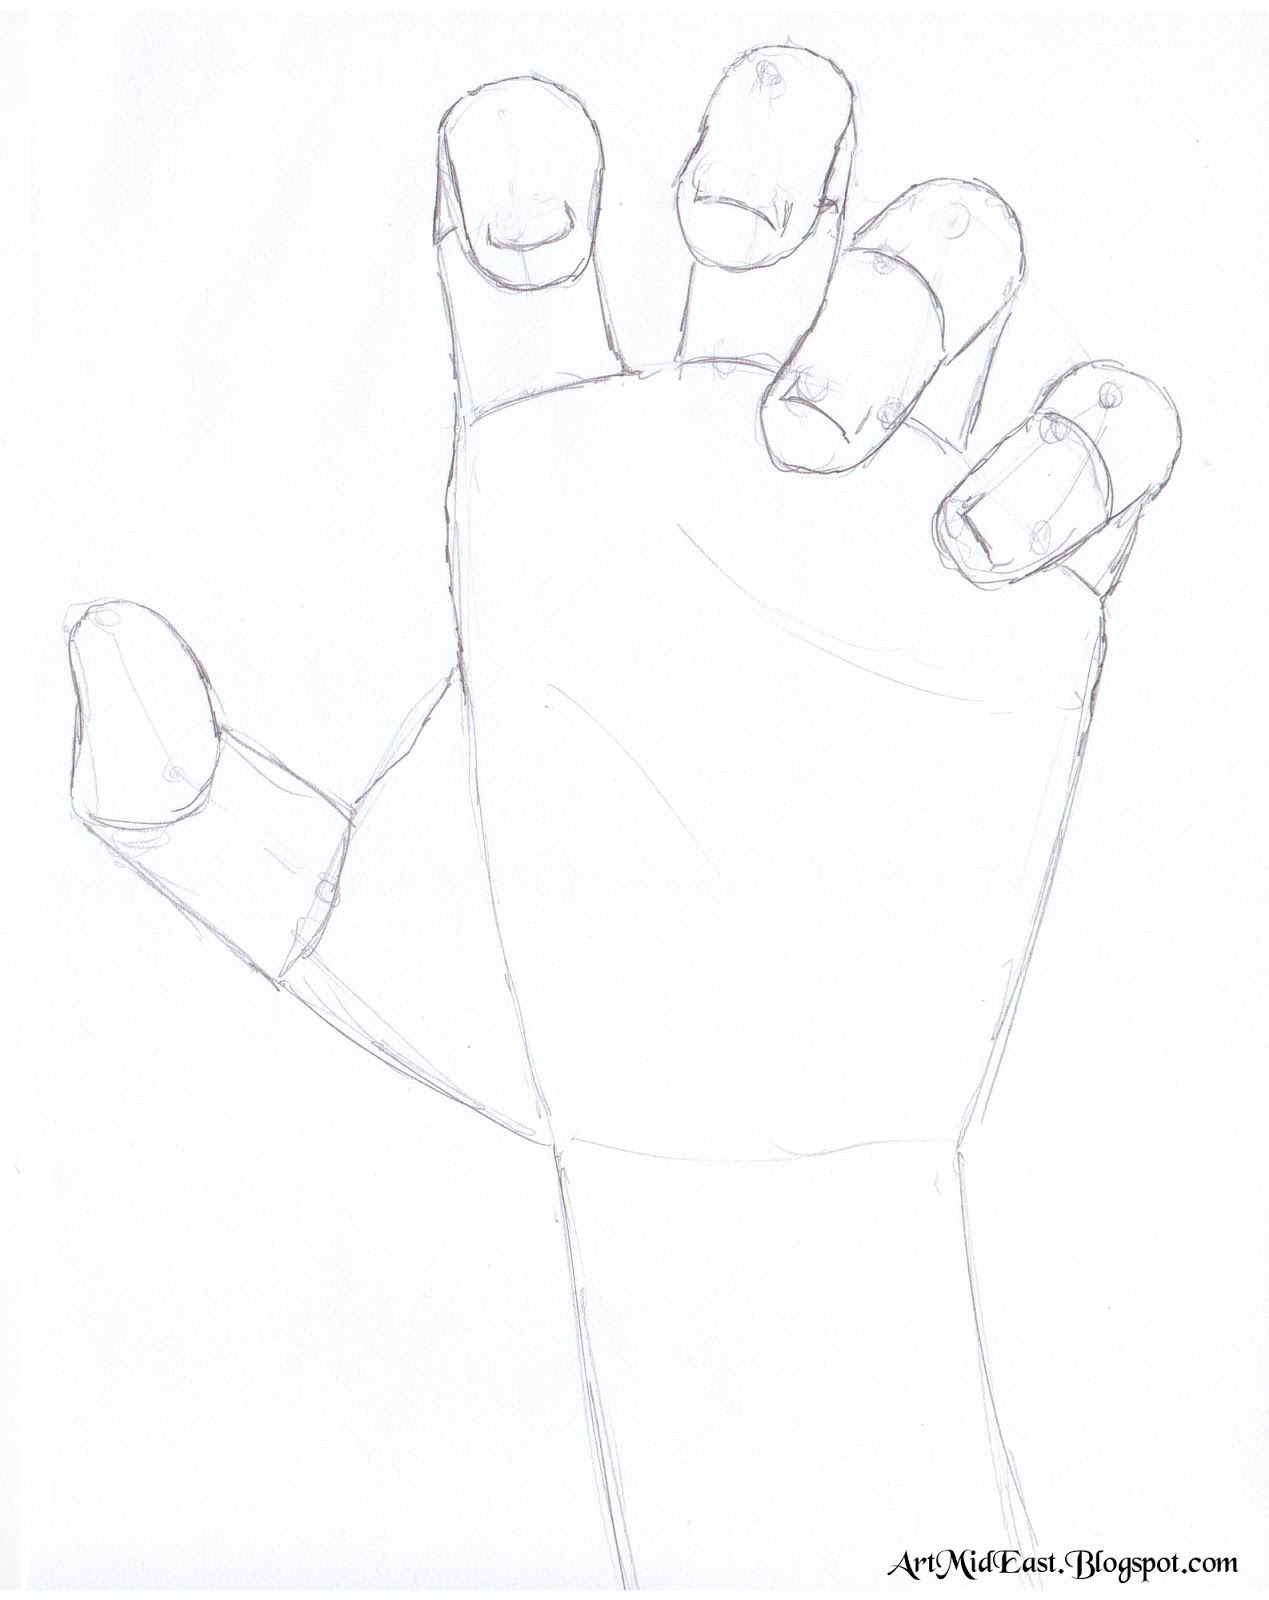 How To Draw Hands Step by Step - [8 Easy Phase]